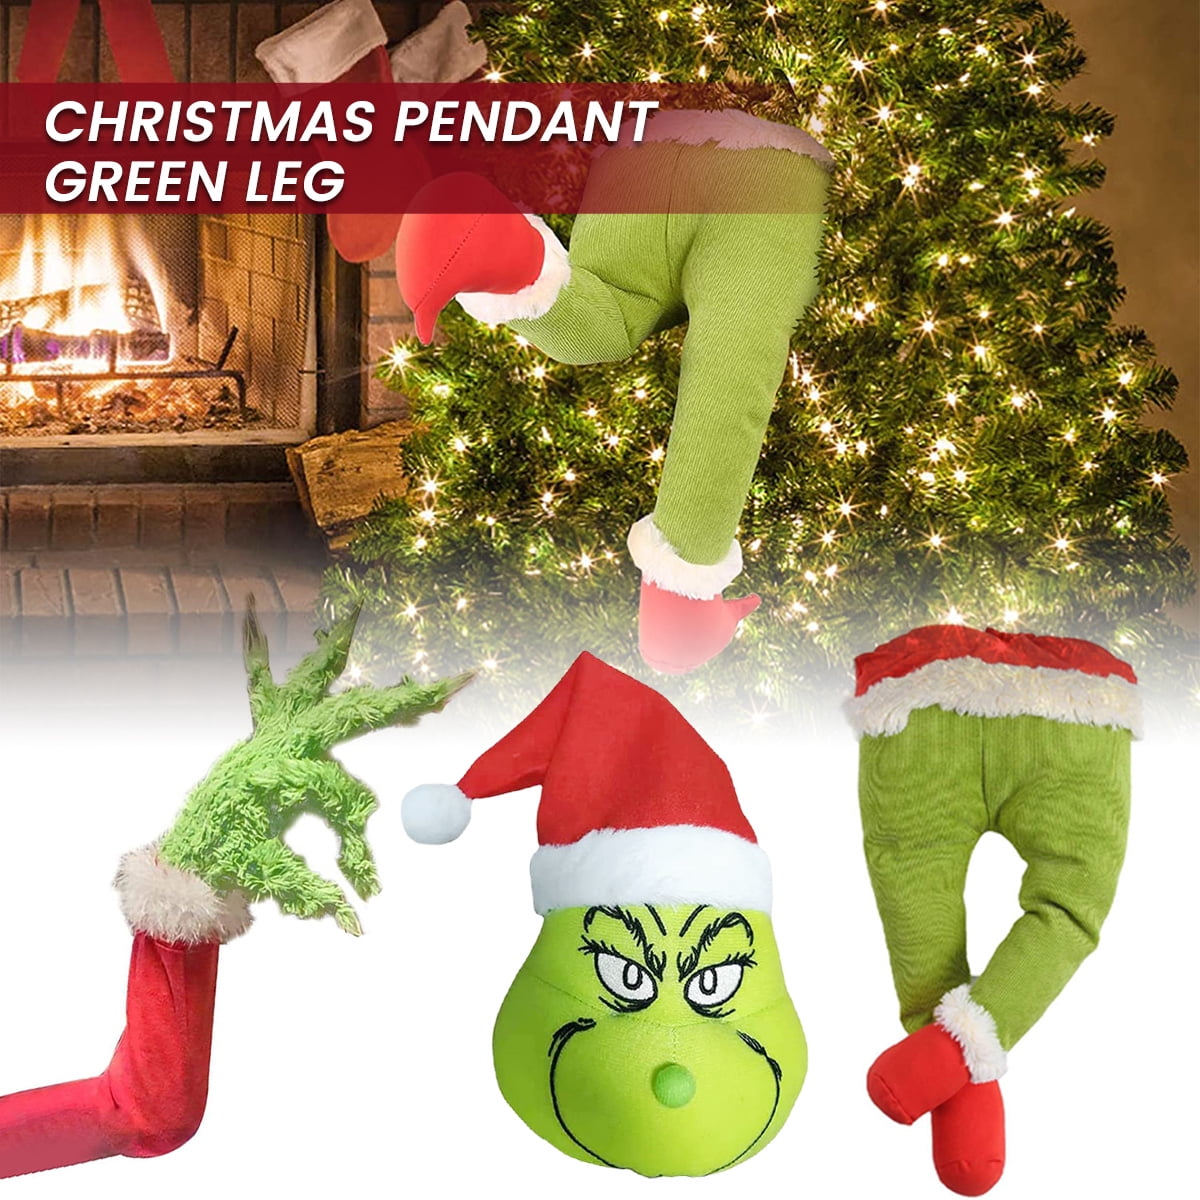 The Grinch Christmas Decorations Green Grinch Arm Car Ornament Holder Tree Set 